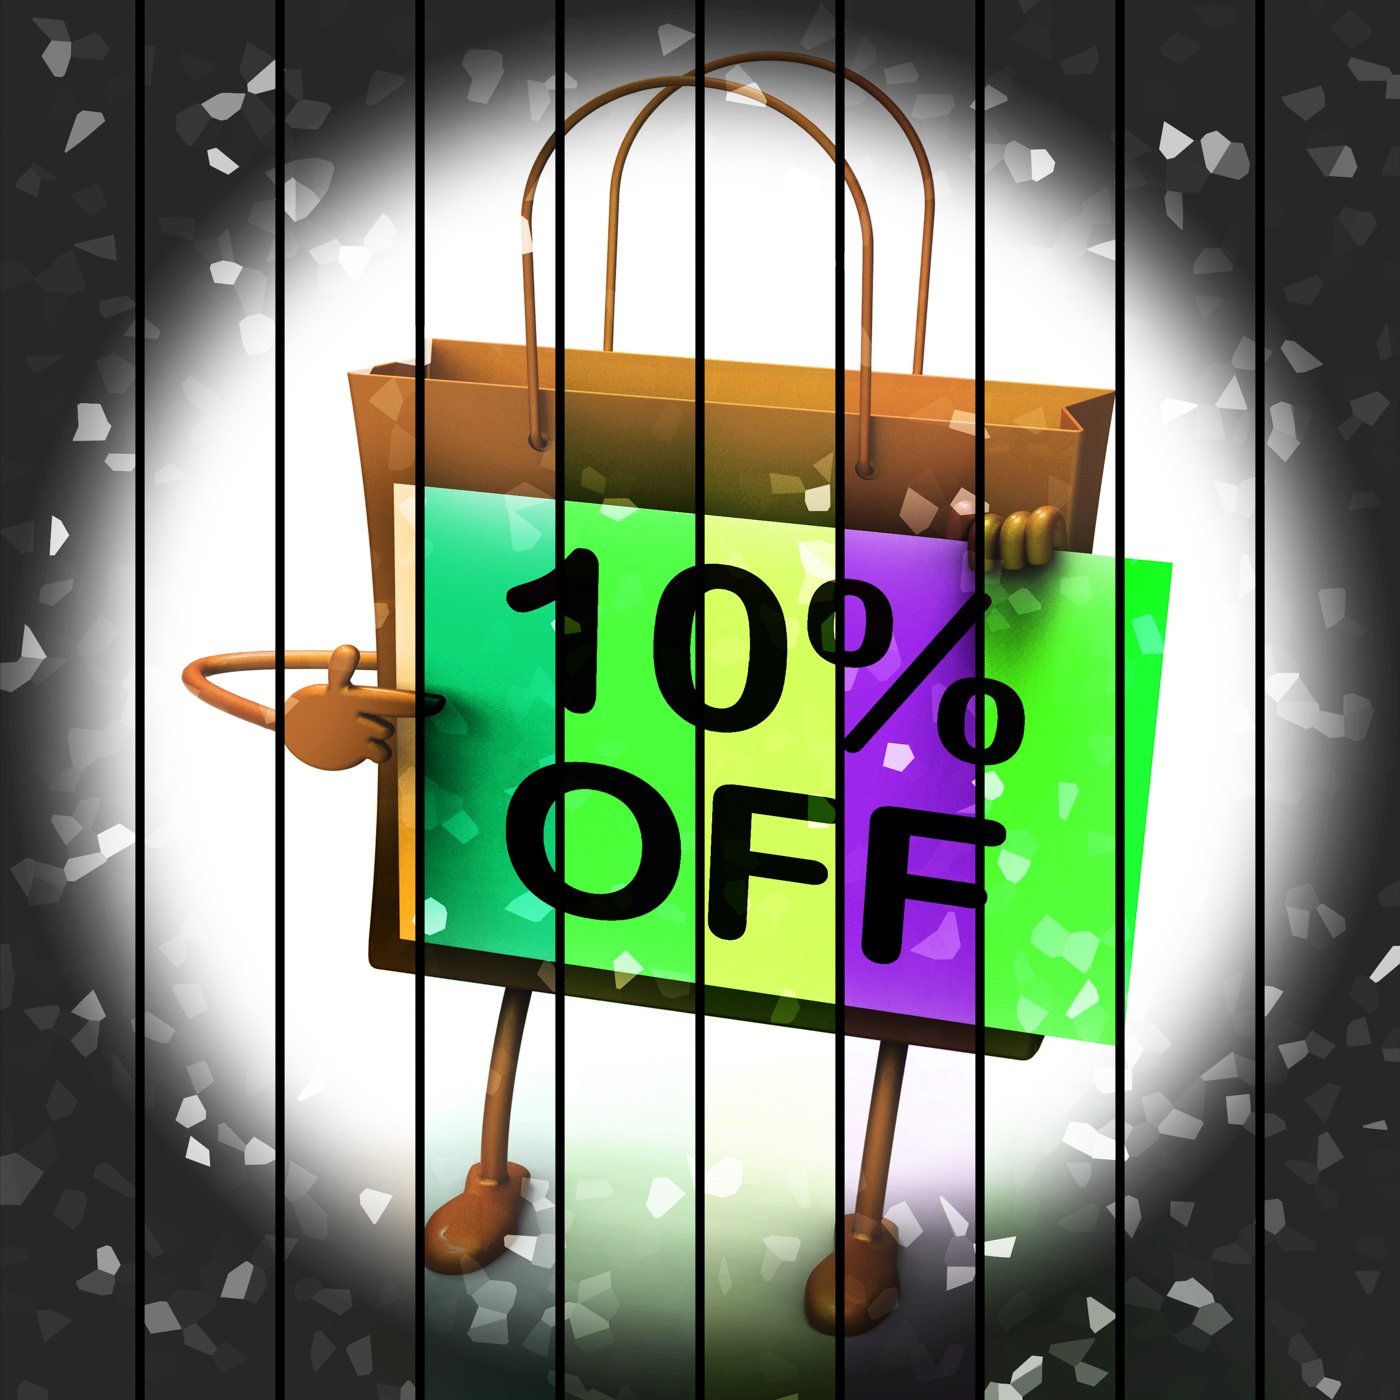 Ten percent reduced on bags shows 10 promotions photo